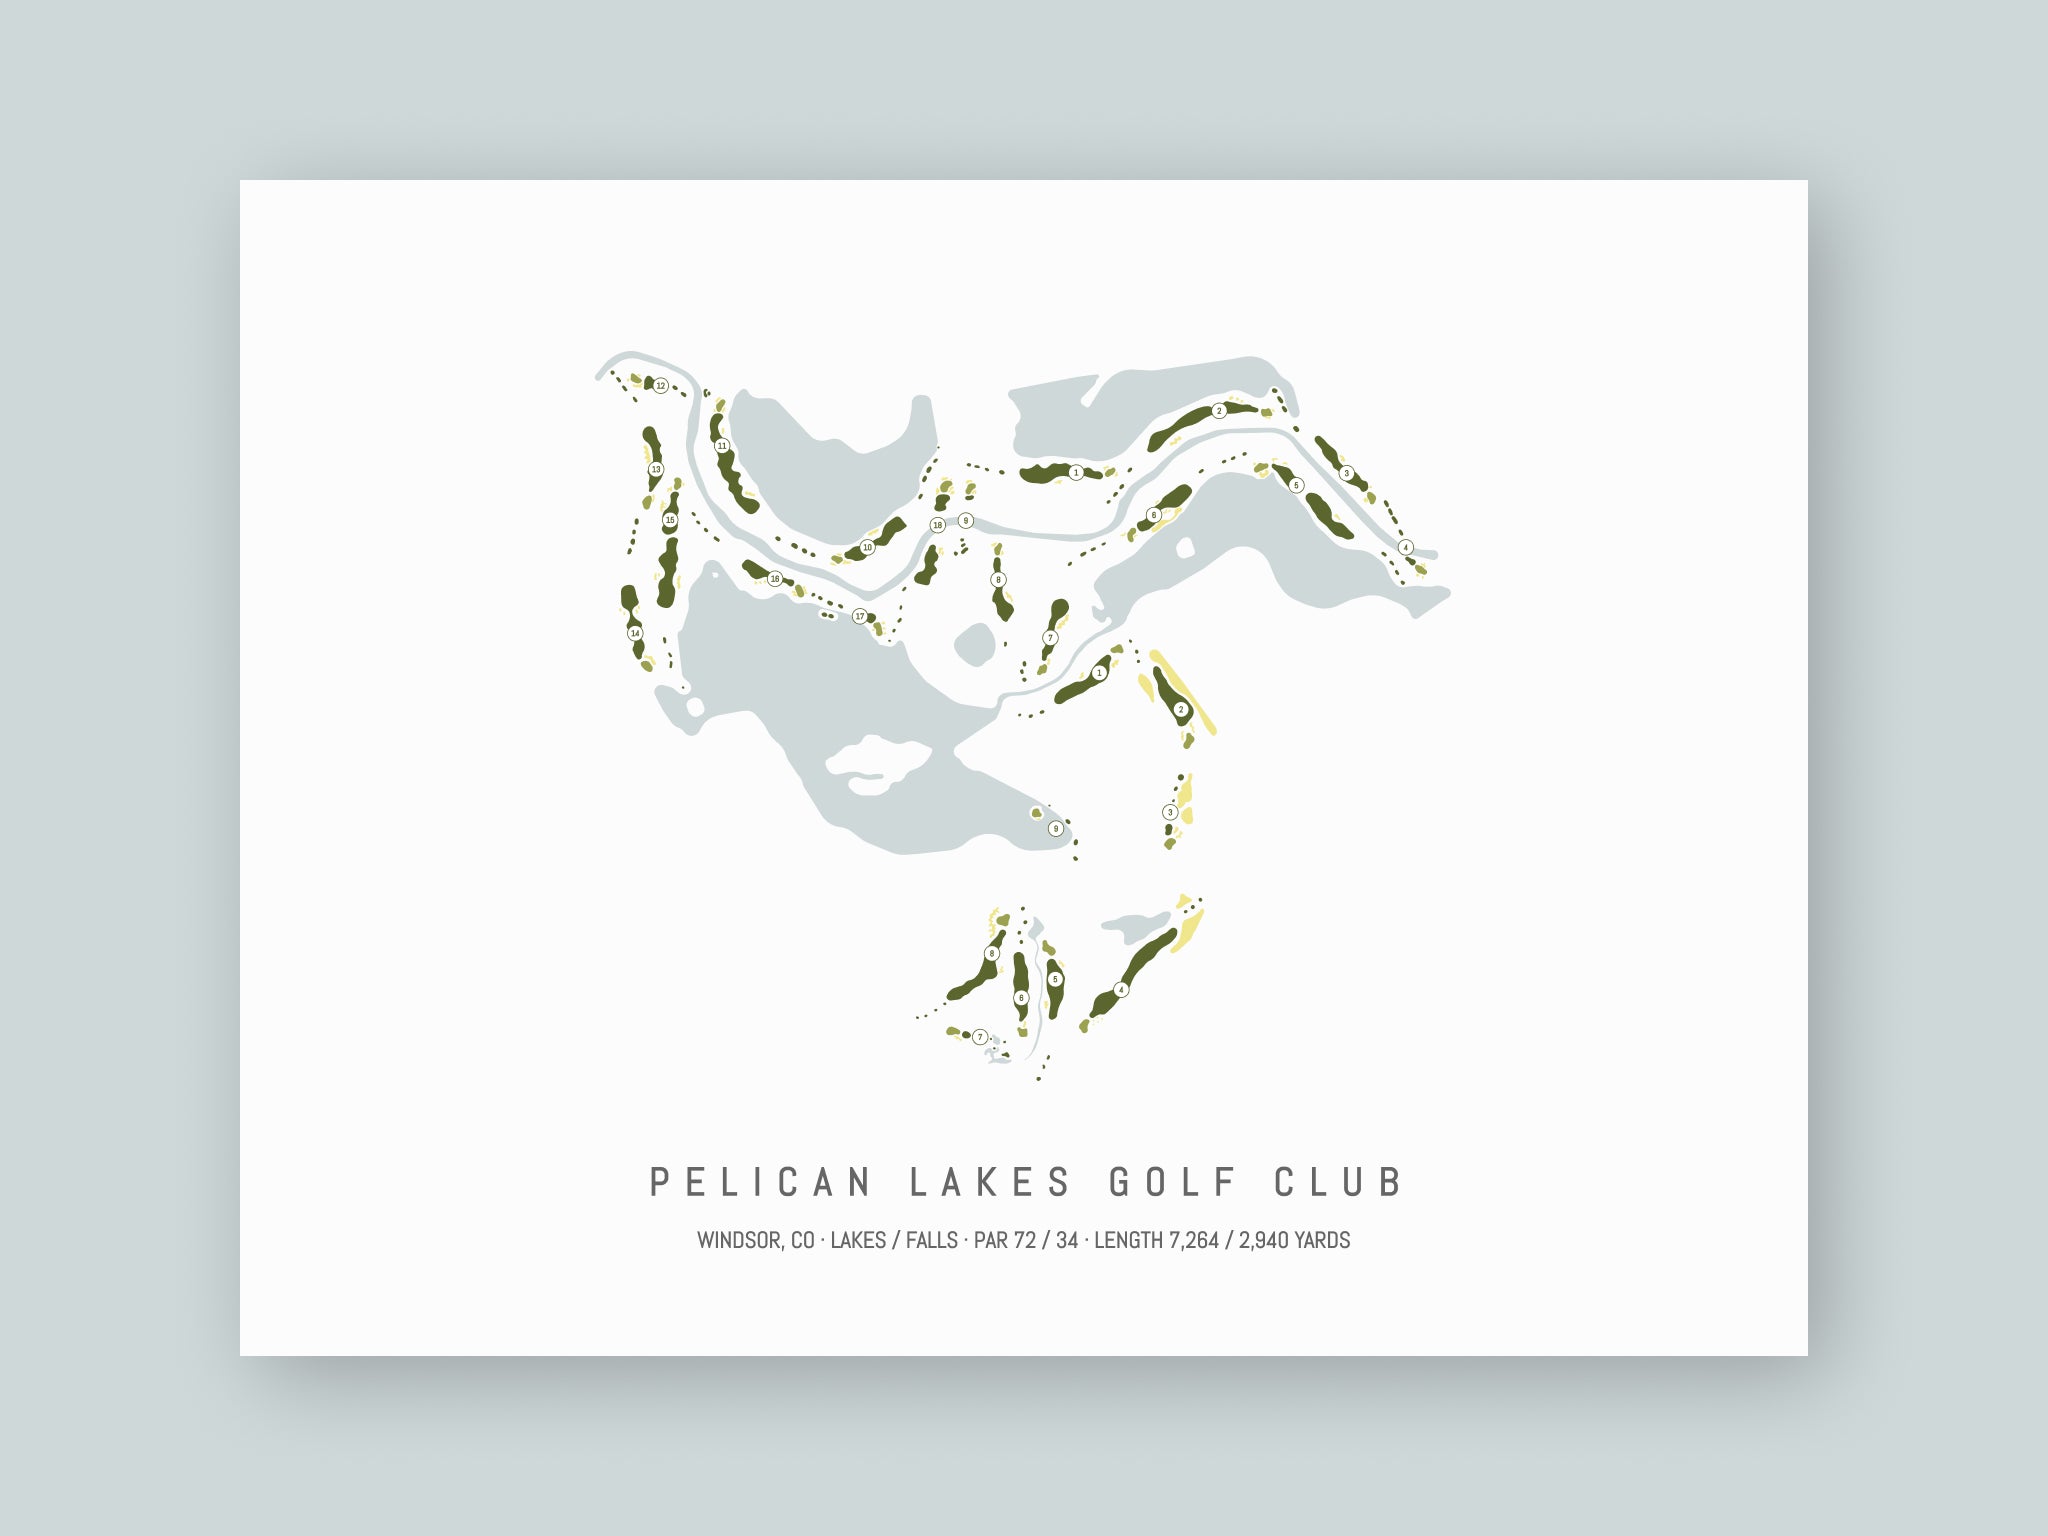 Pelican-Lakes-Golf-Club-CO--Unframed-24x18-With-Hole-Numbers